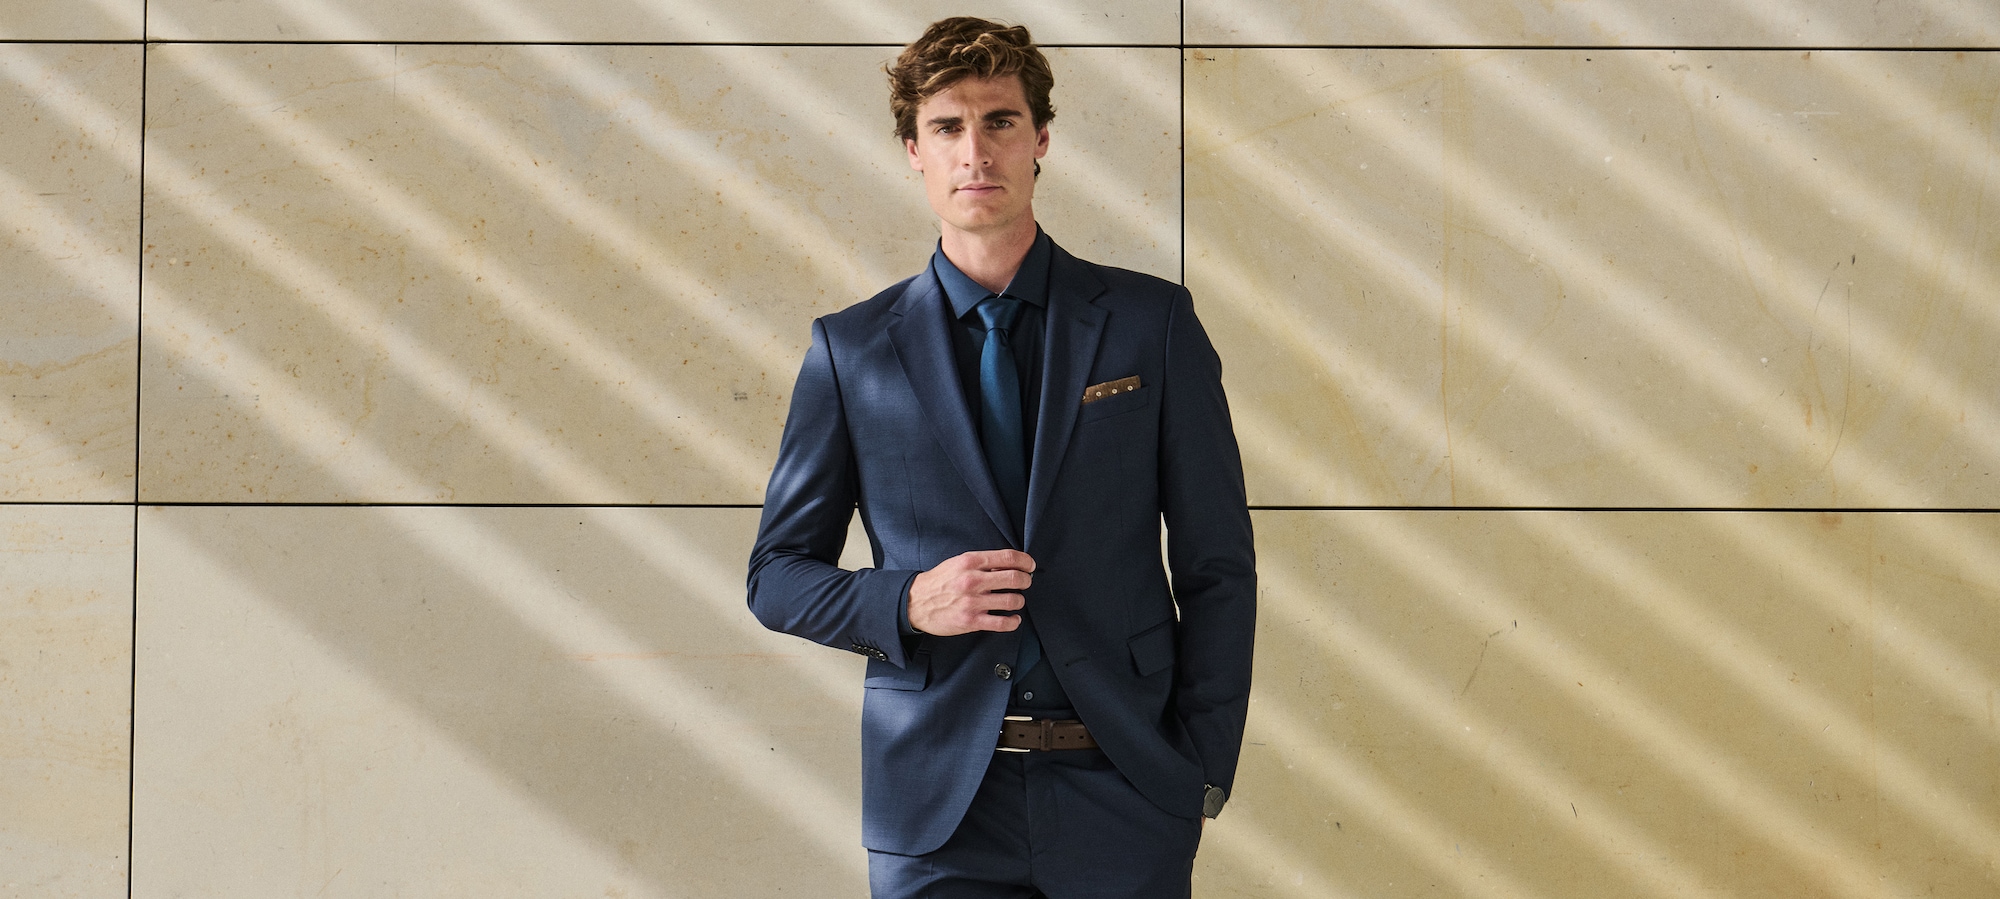 Find your best fit How to choose the right suit